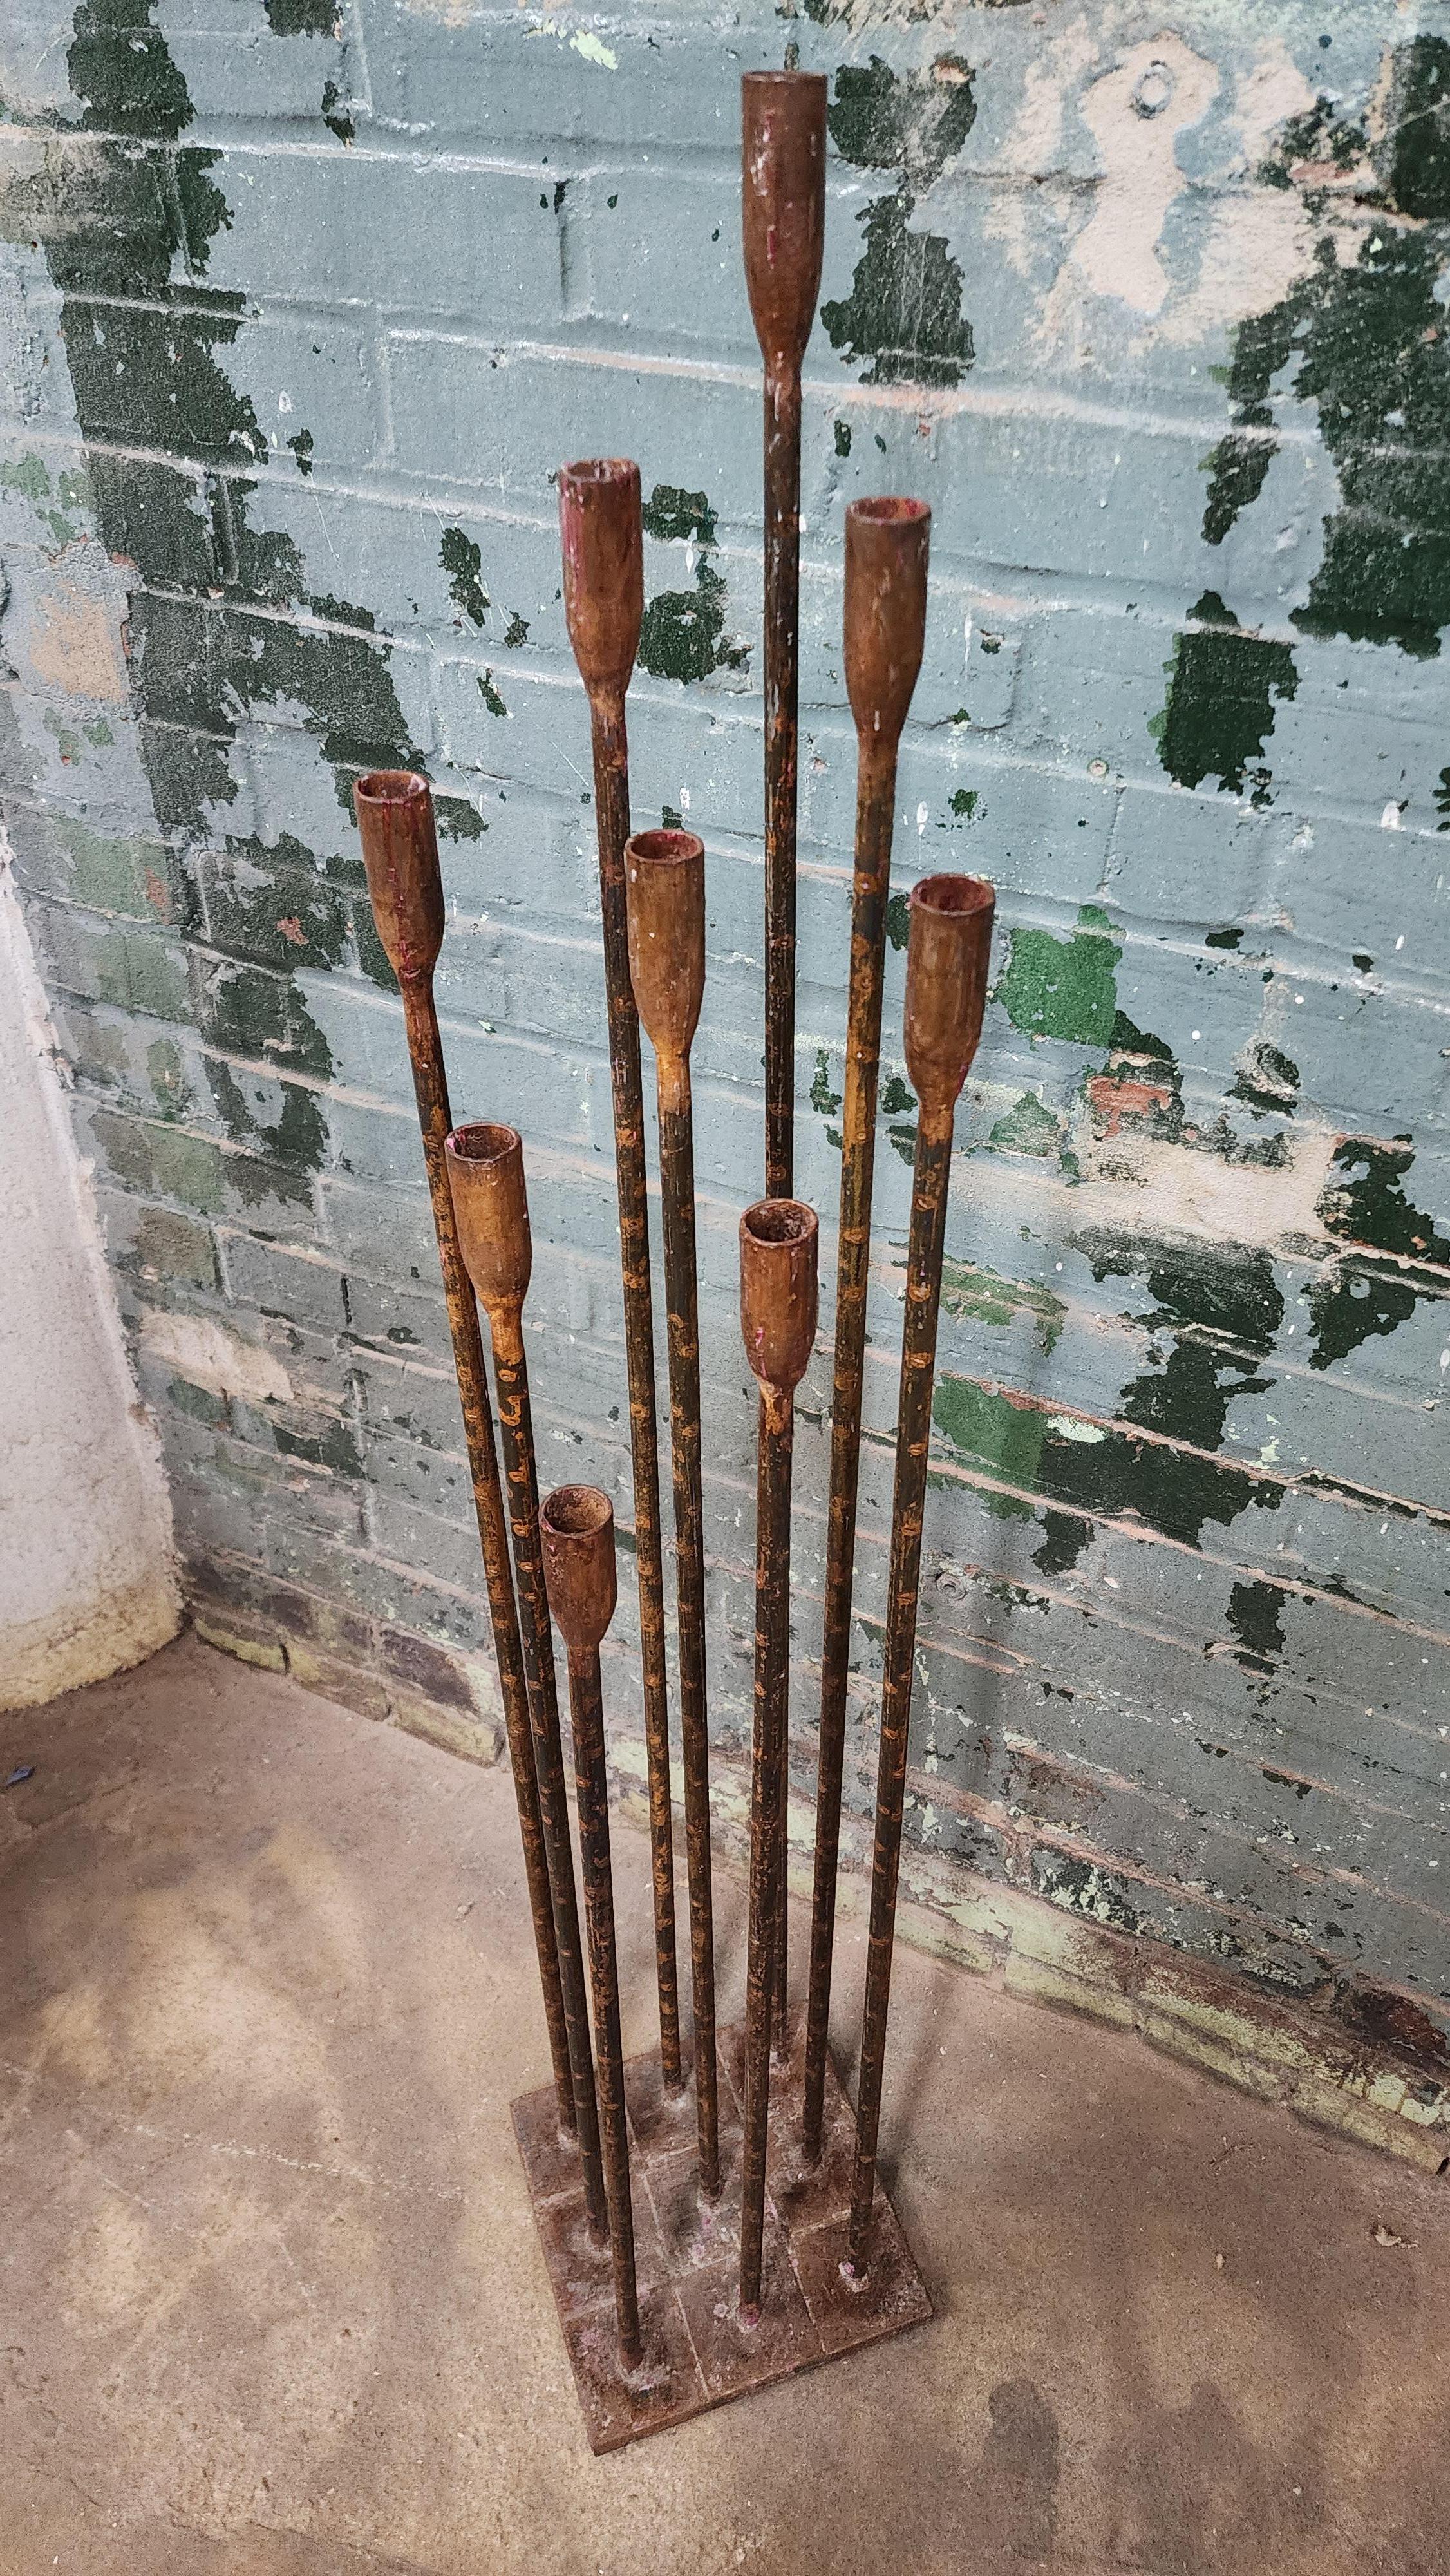 Beautiful iron floor candelabra in the manner of Harry Bertoia. Holds 9 candles and stands about 4 ft tall. Has a cool patina with melted wax.